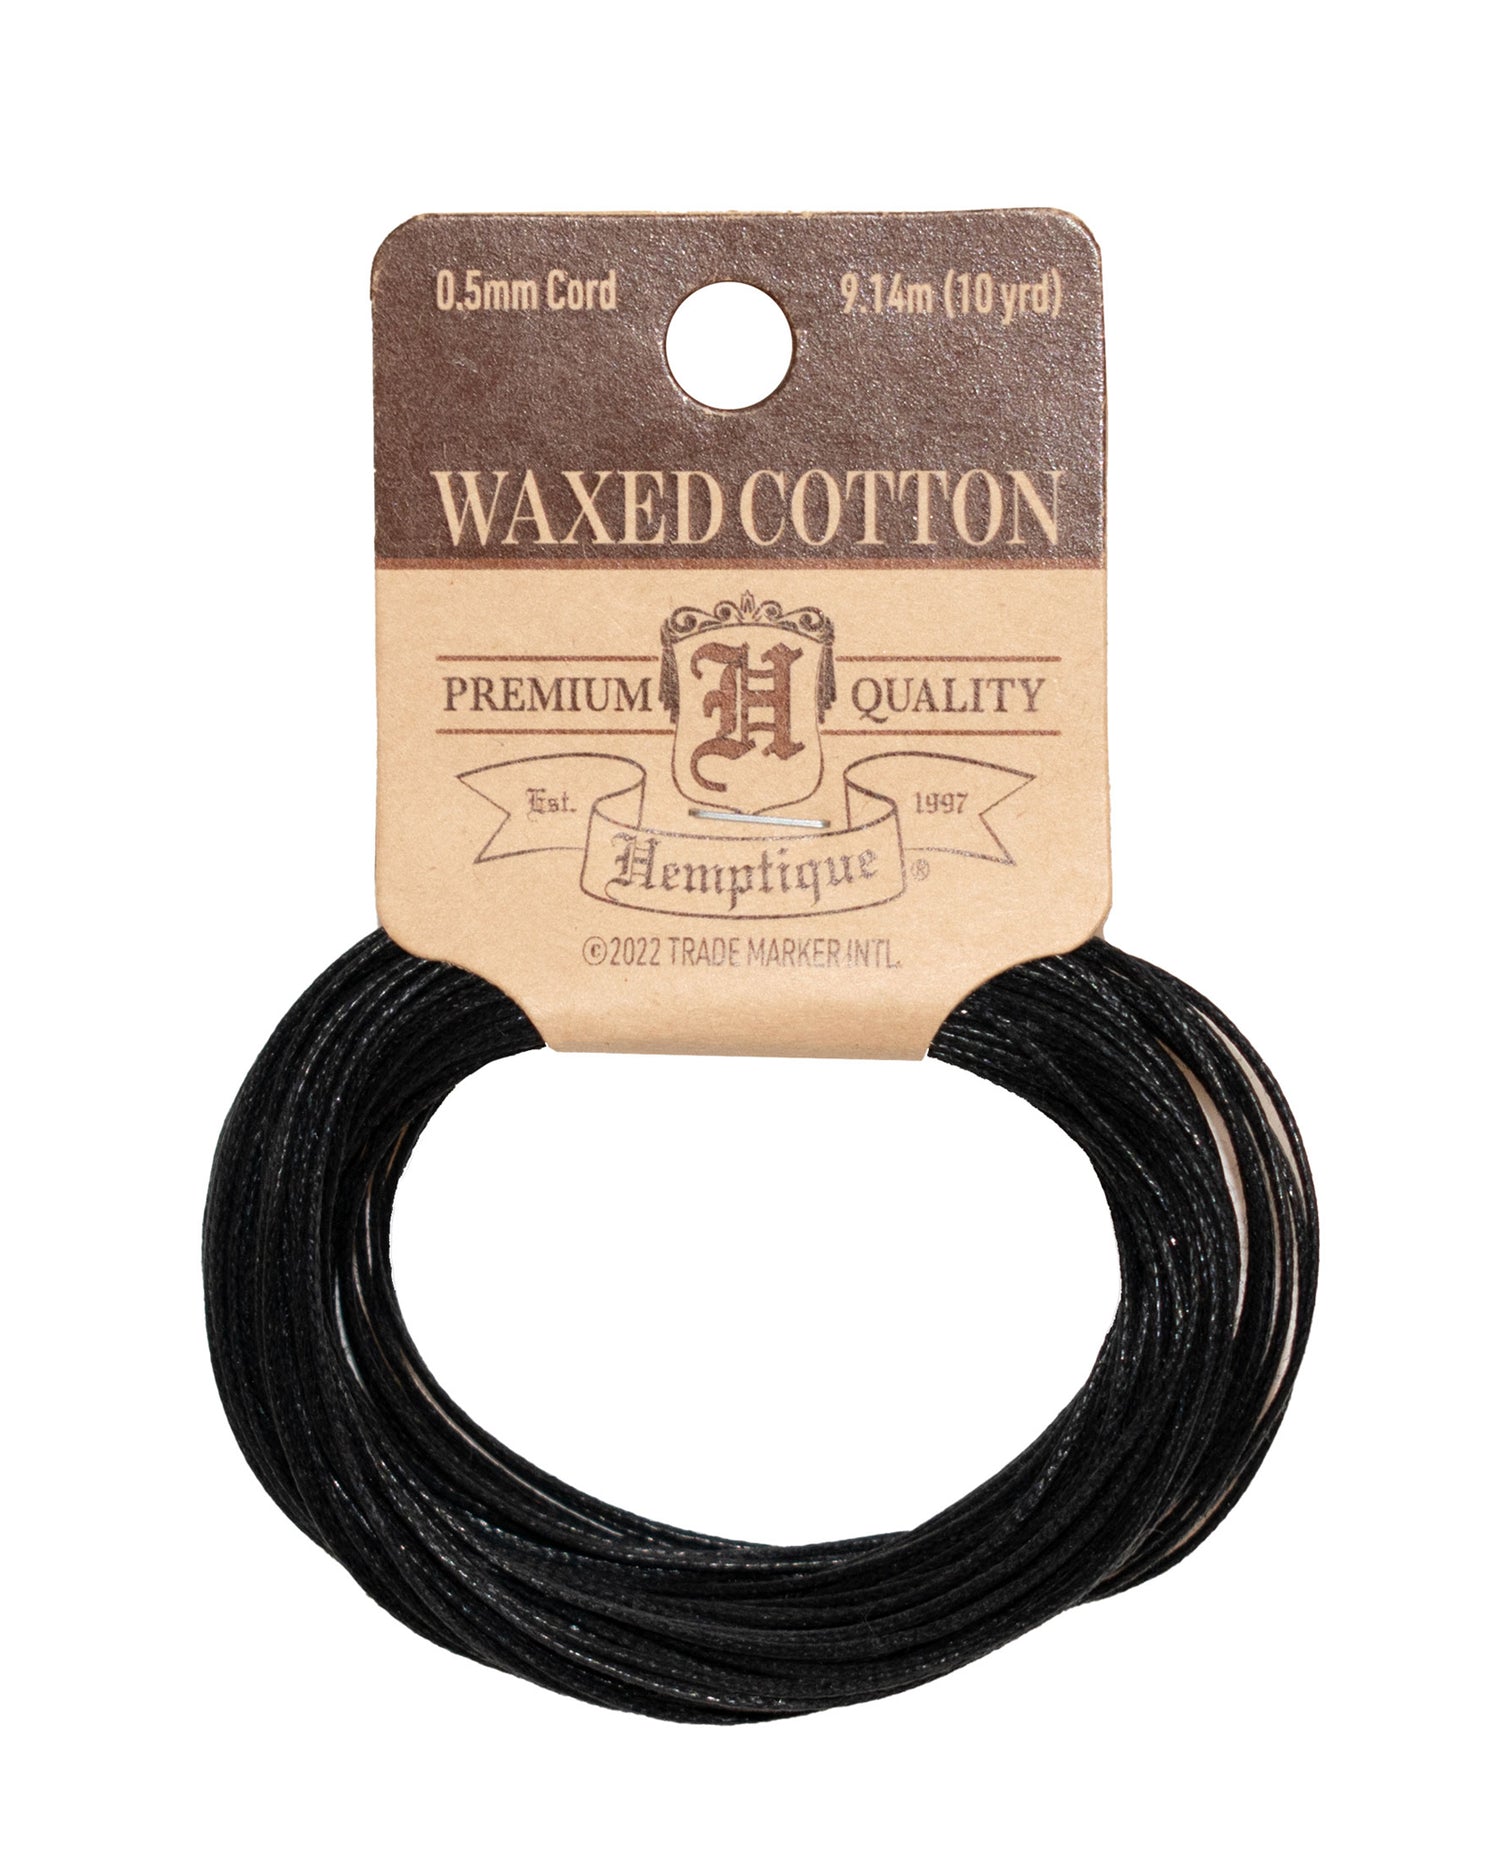 Waxed Cotton Cord Coil 0.5mm Black